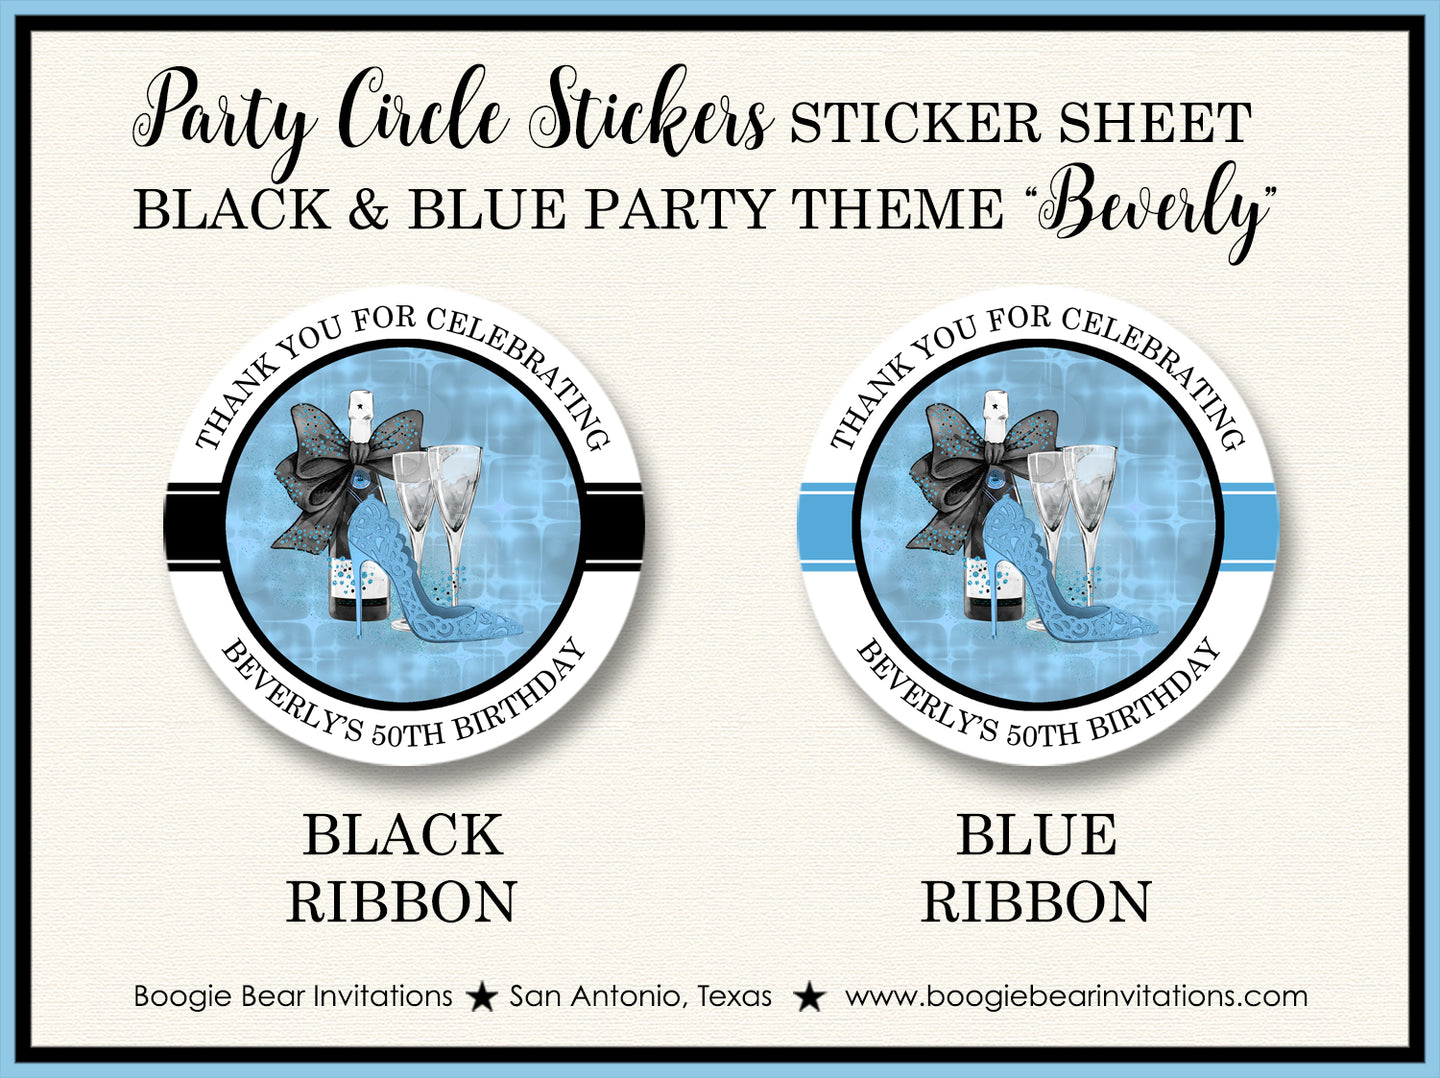 Black Blue Fashion Party Stickers Circle Sheet Round Birthday High Heels Chic Boogie Bear Invitations Beverly Theme